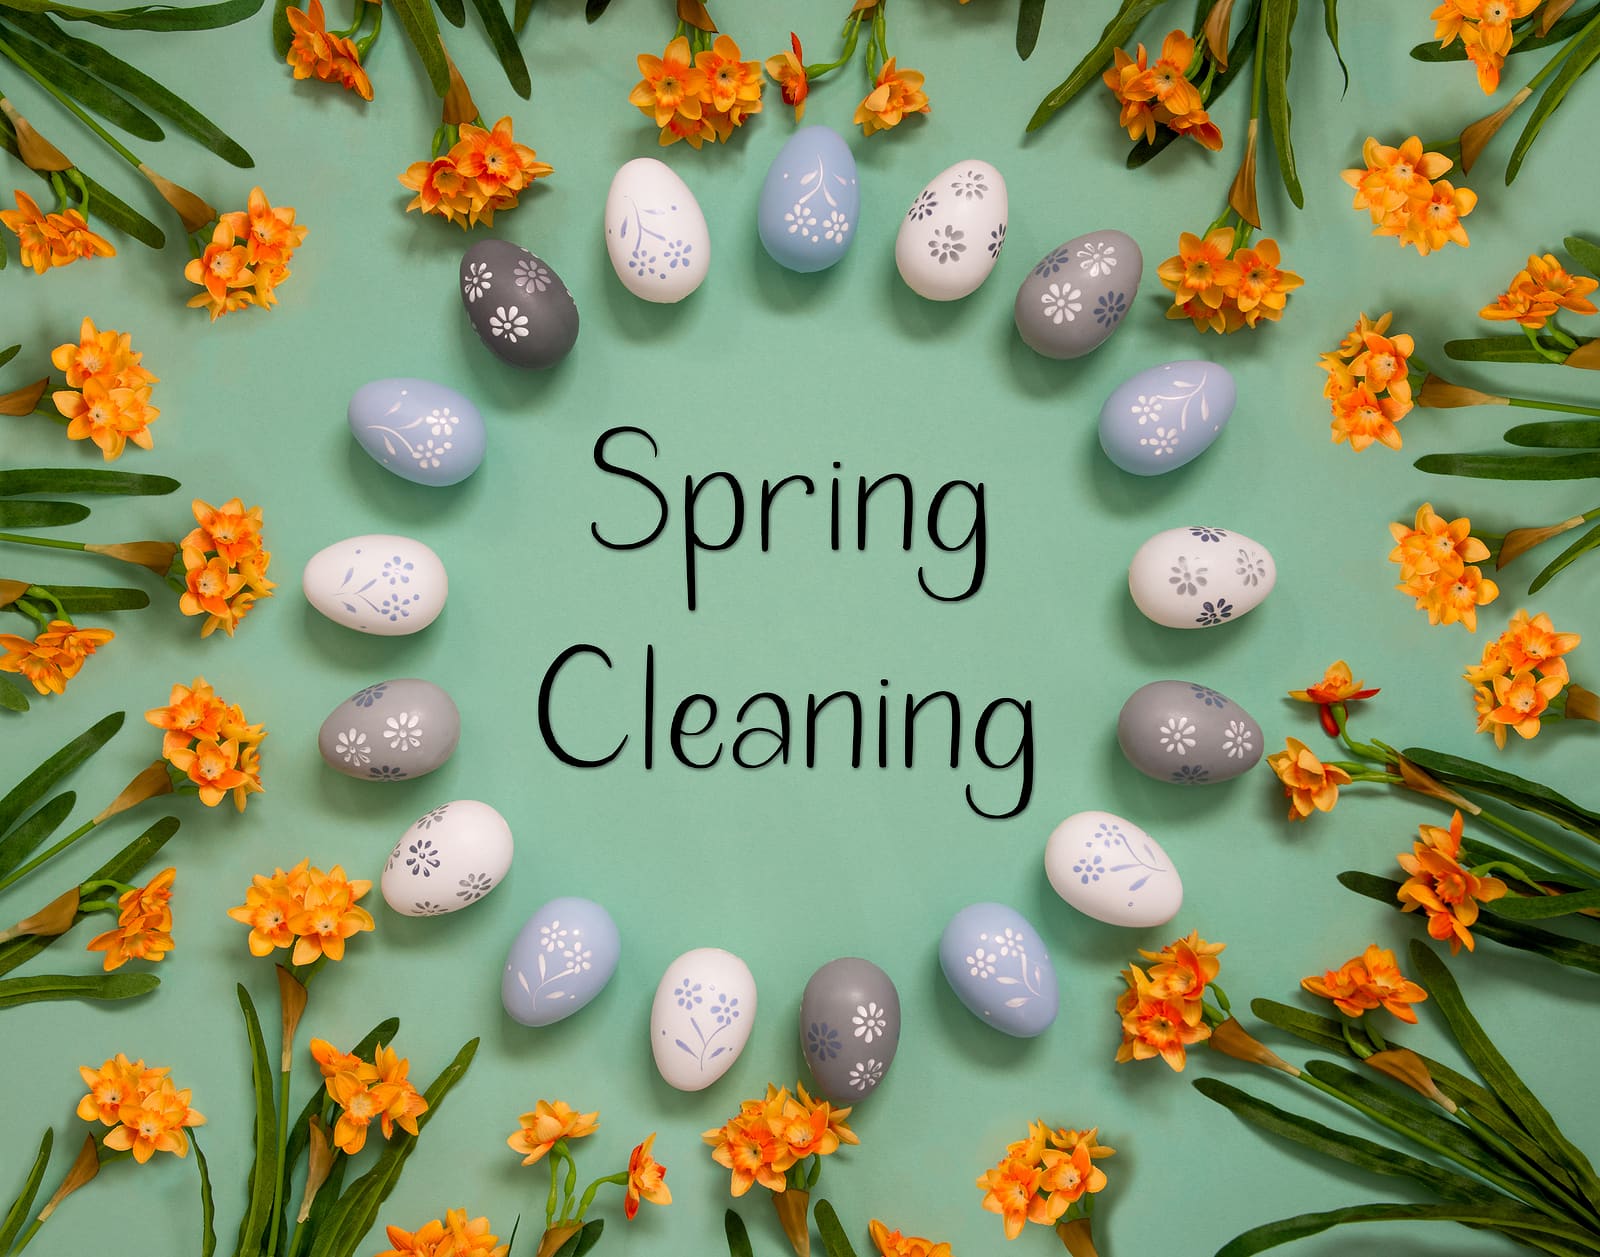 Spring cleaning decorative image